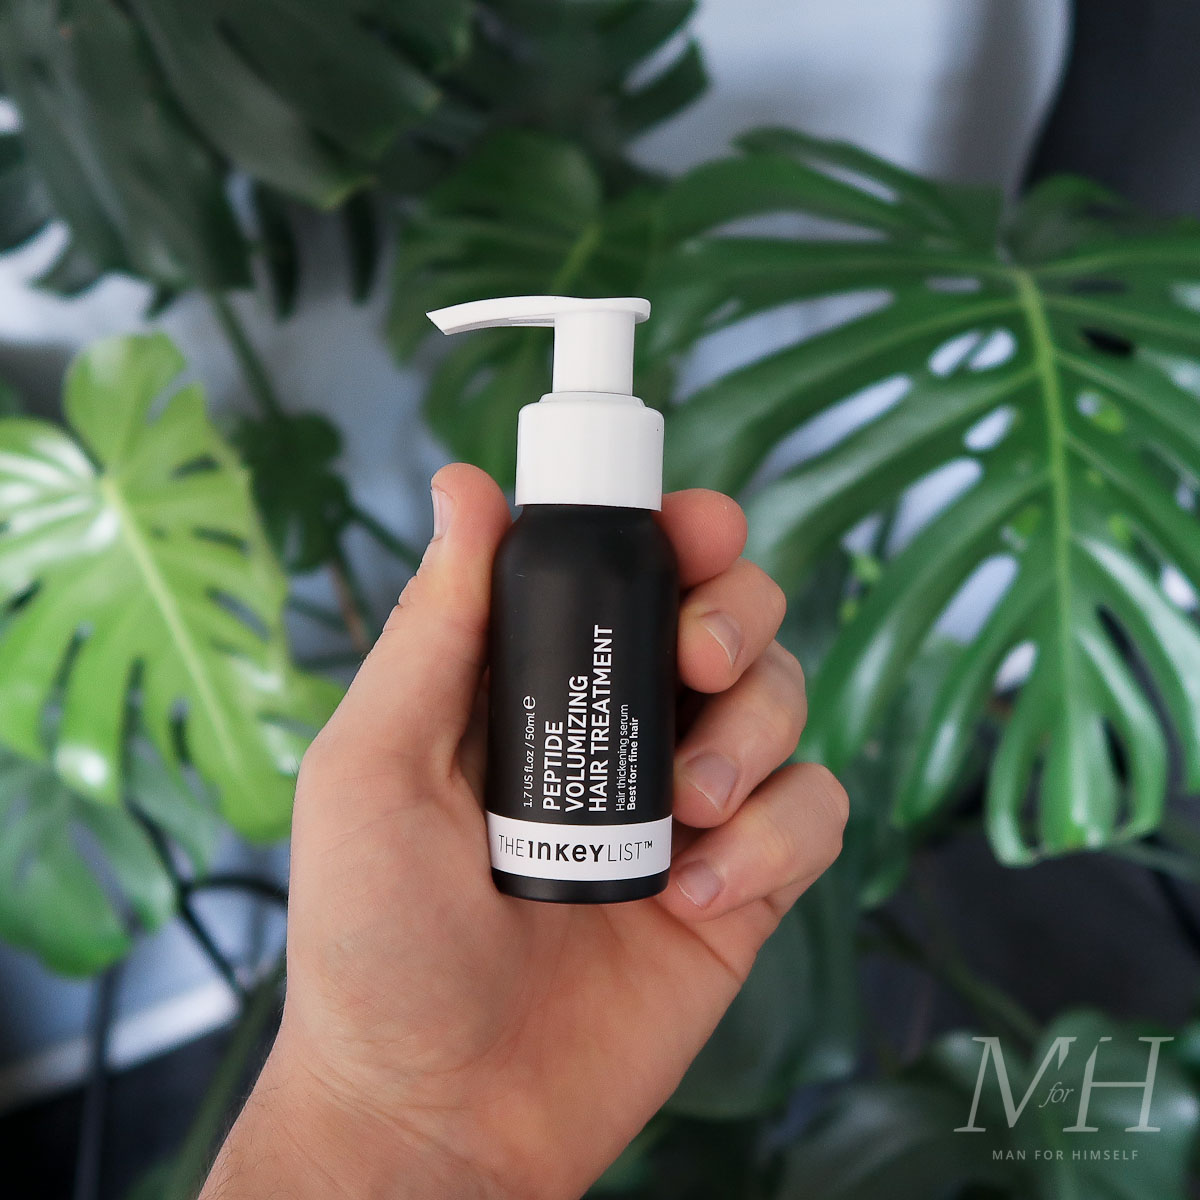 the-inkey-list-volumizing-hair-treatment-product-review-man-for-himself